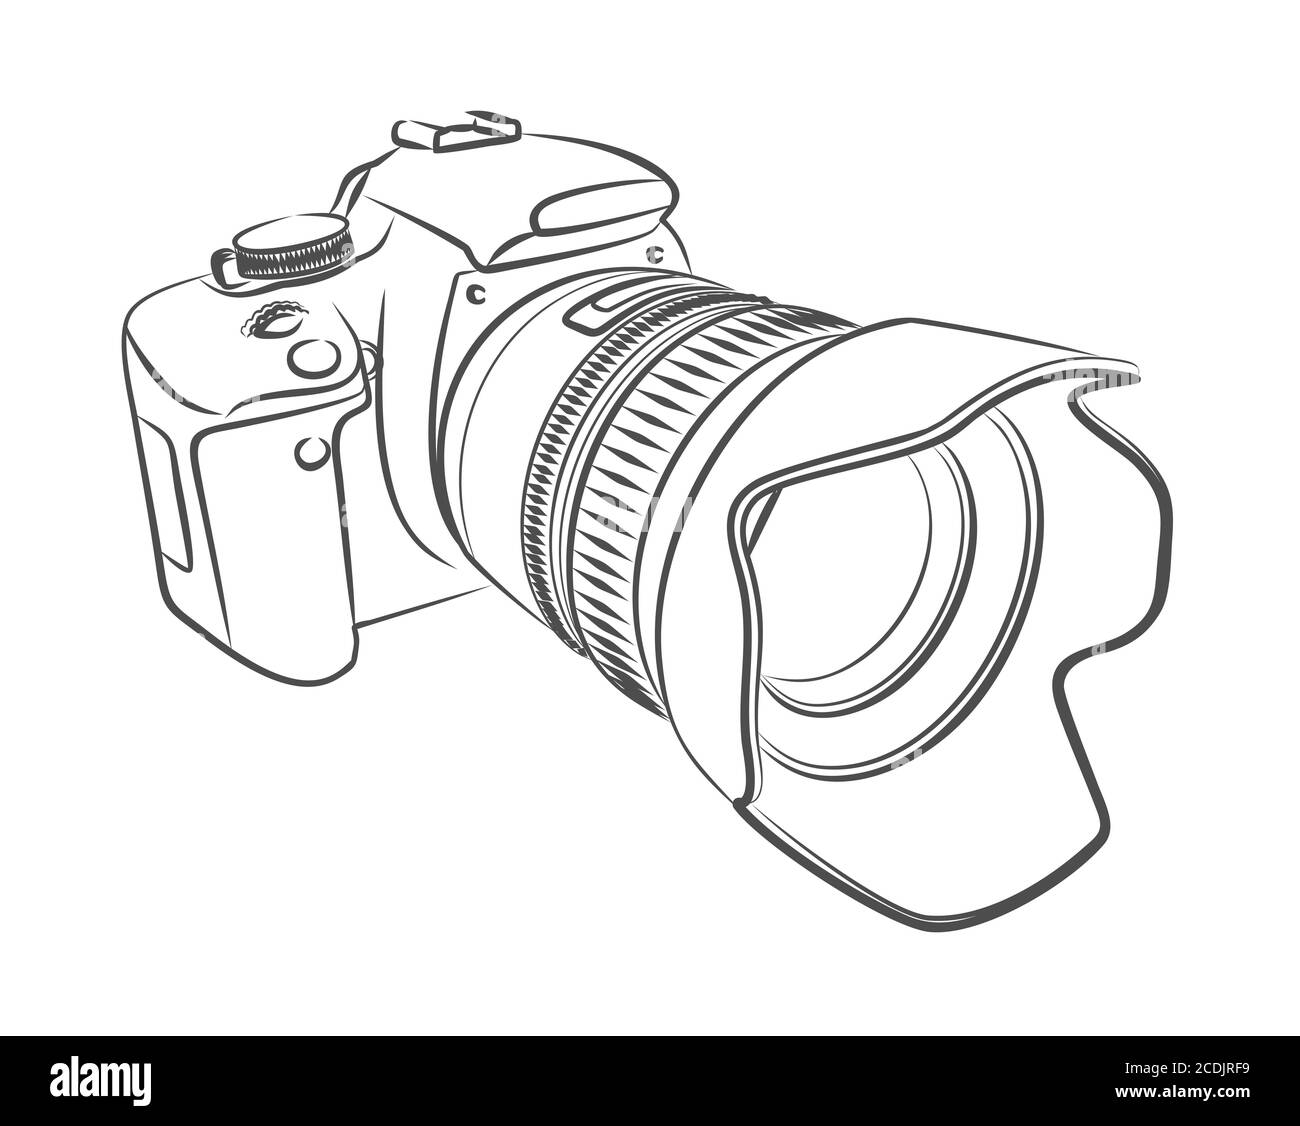 Monochrome sketch of video security camera lens Vector Image